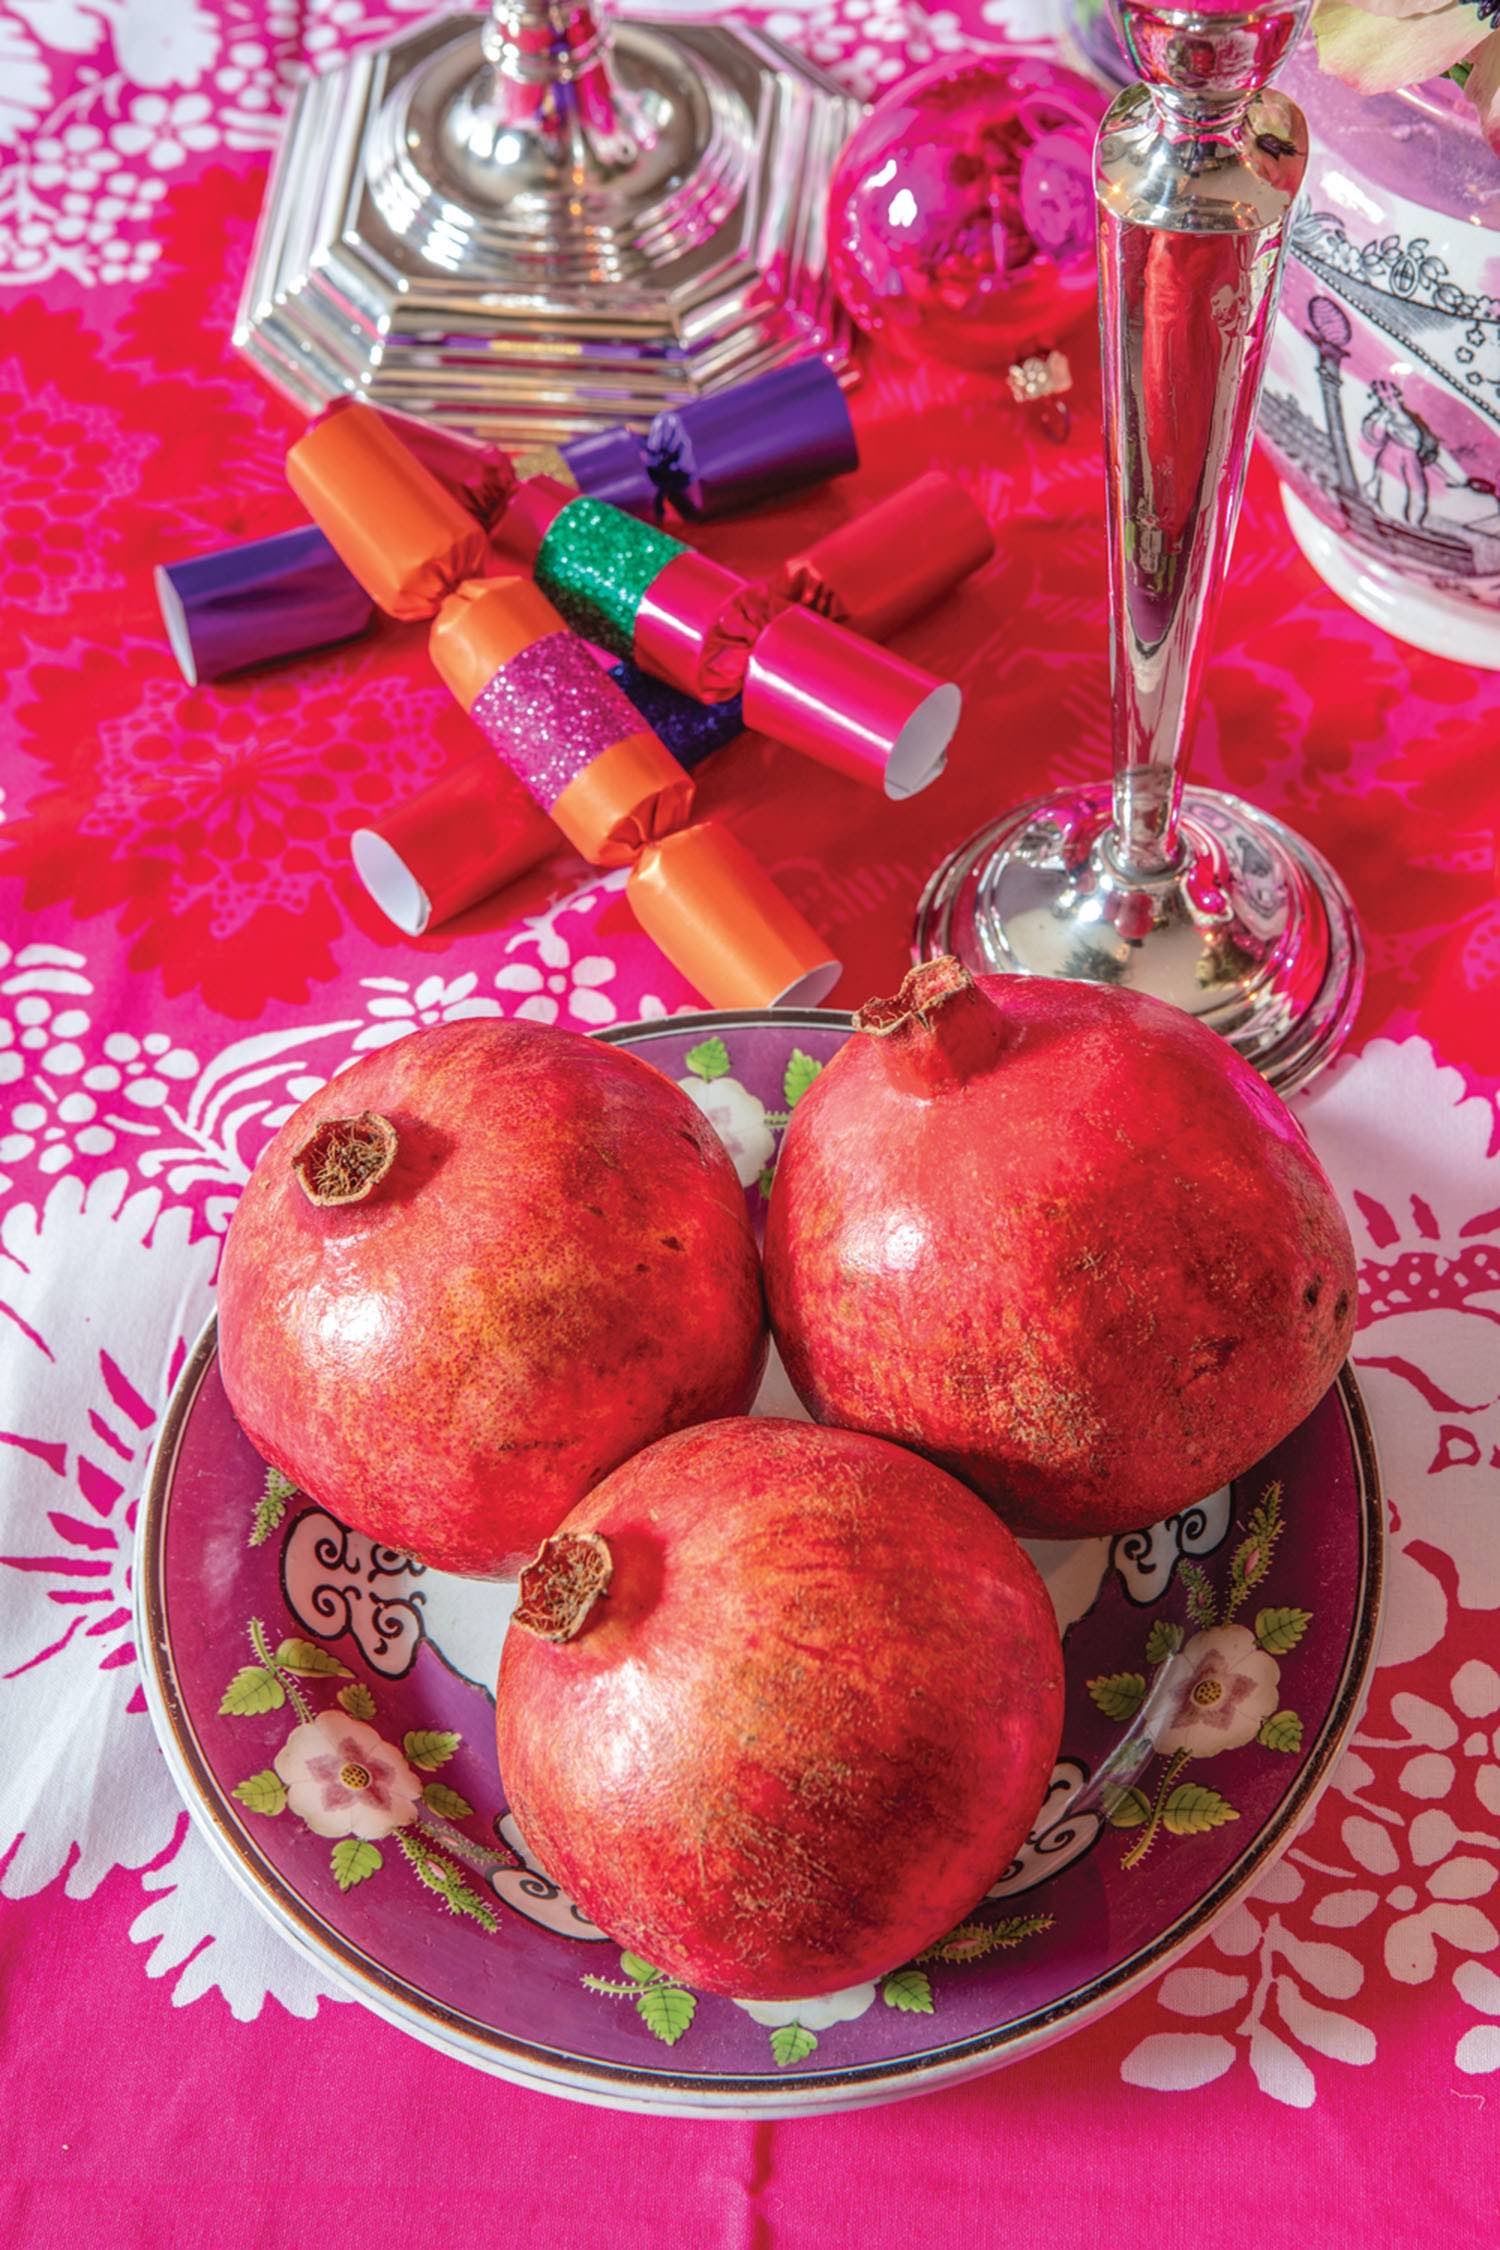 A bowl of pomegranates at the table.